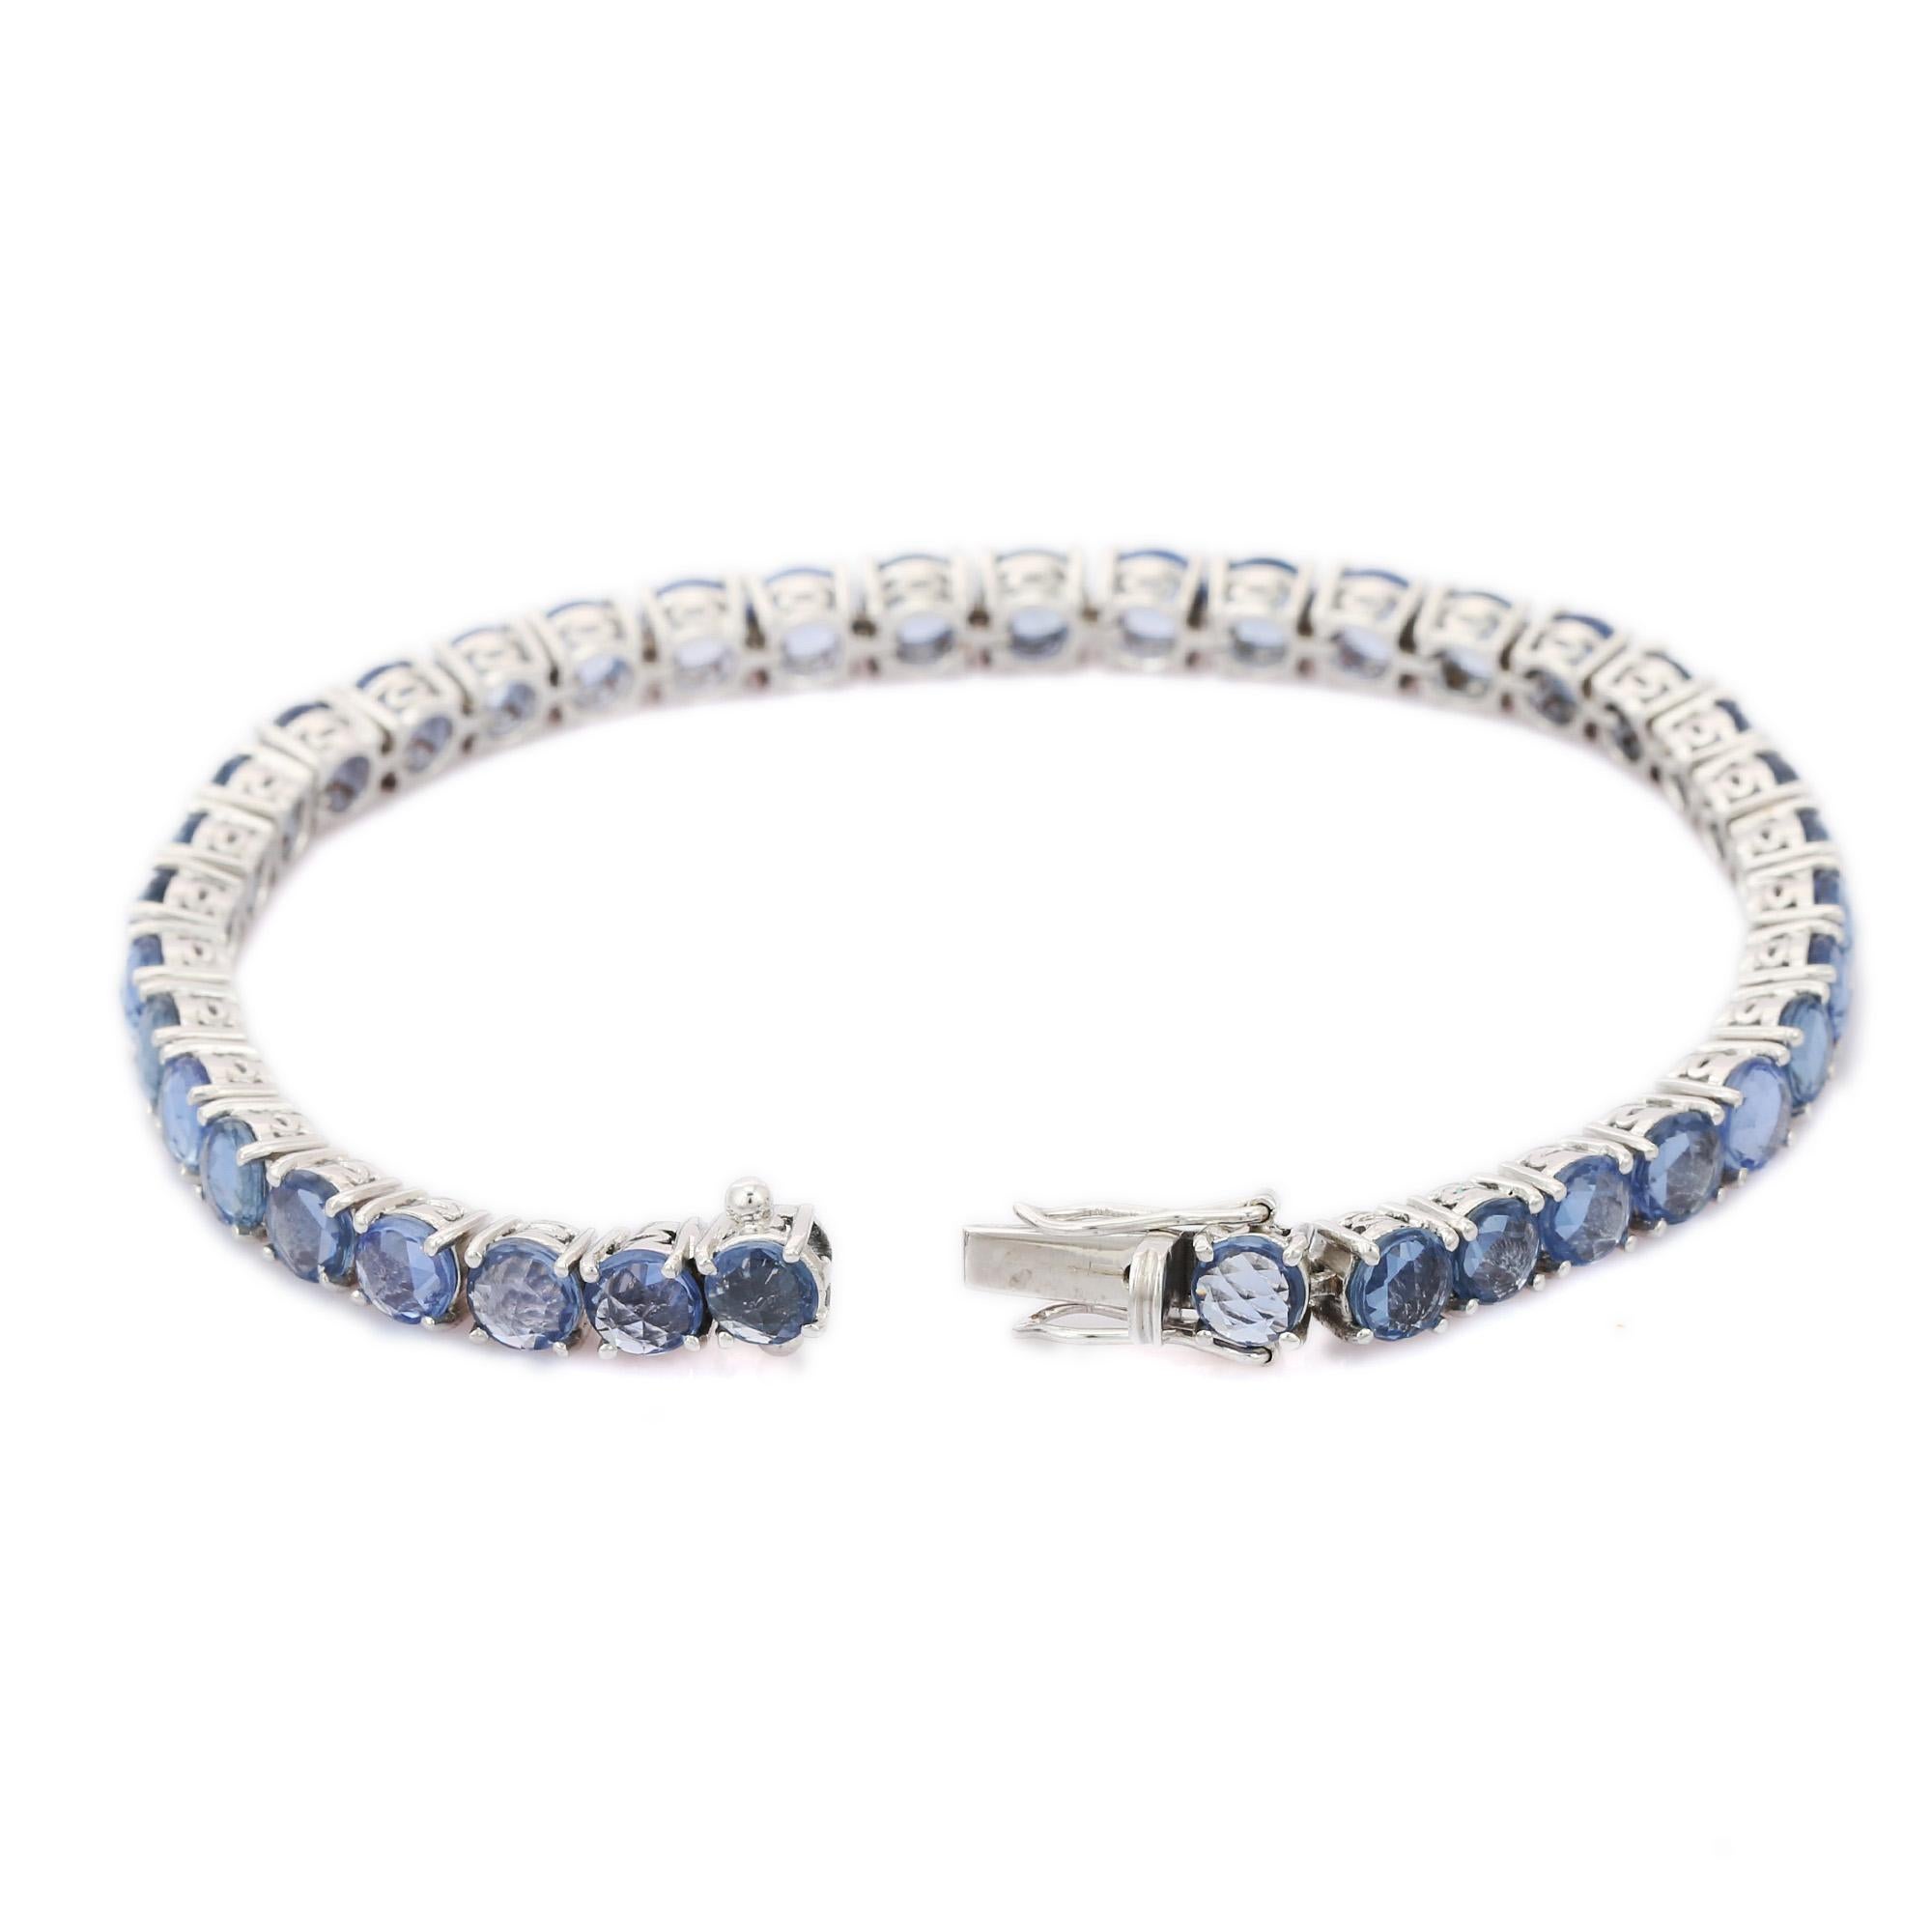 Blue Sapphire bracelet in 18K Gold. It has a perfect round cut gemstone to make you stand out on any occasion or an event.
A tennis bracelet is an essential piece of jewelry when it comes to your wedding day. The sleek and elegant style complements